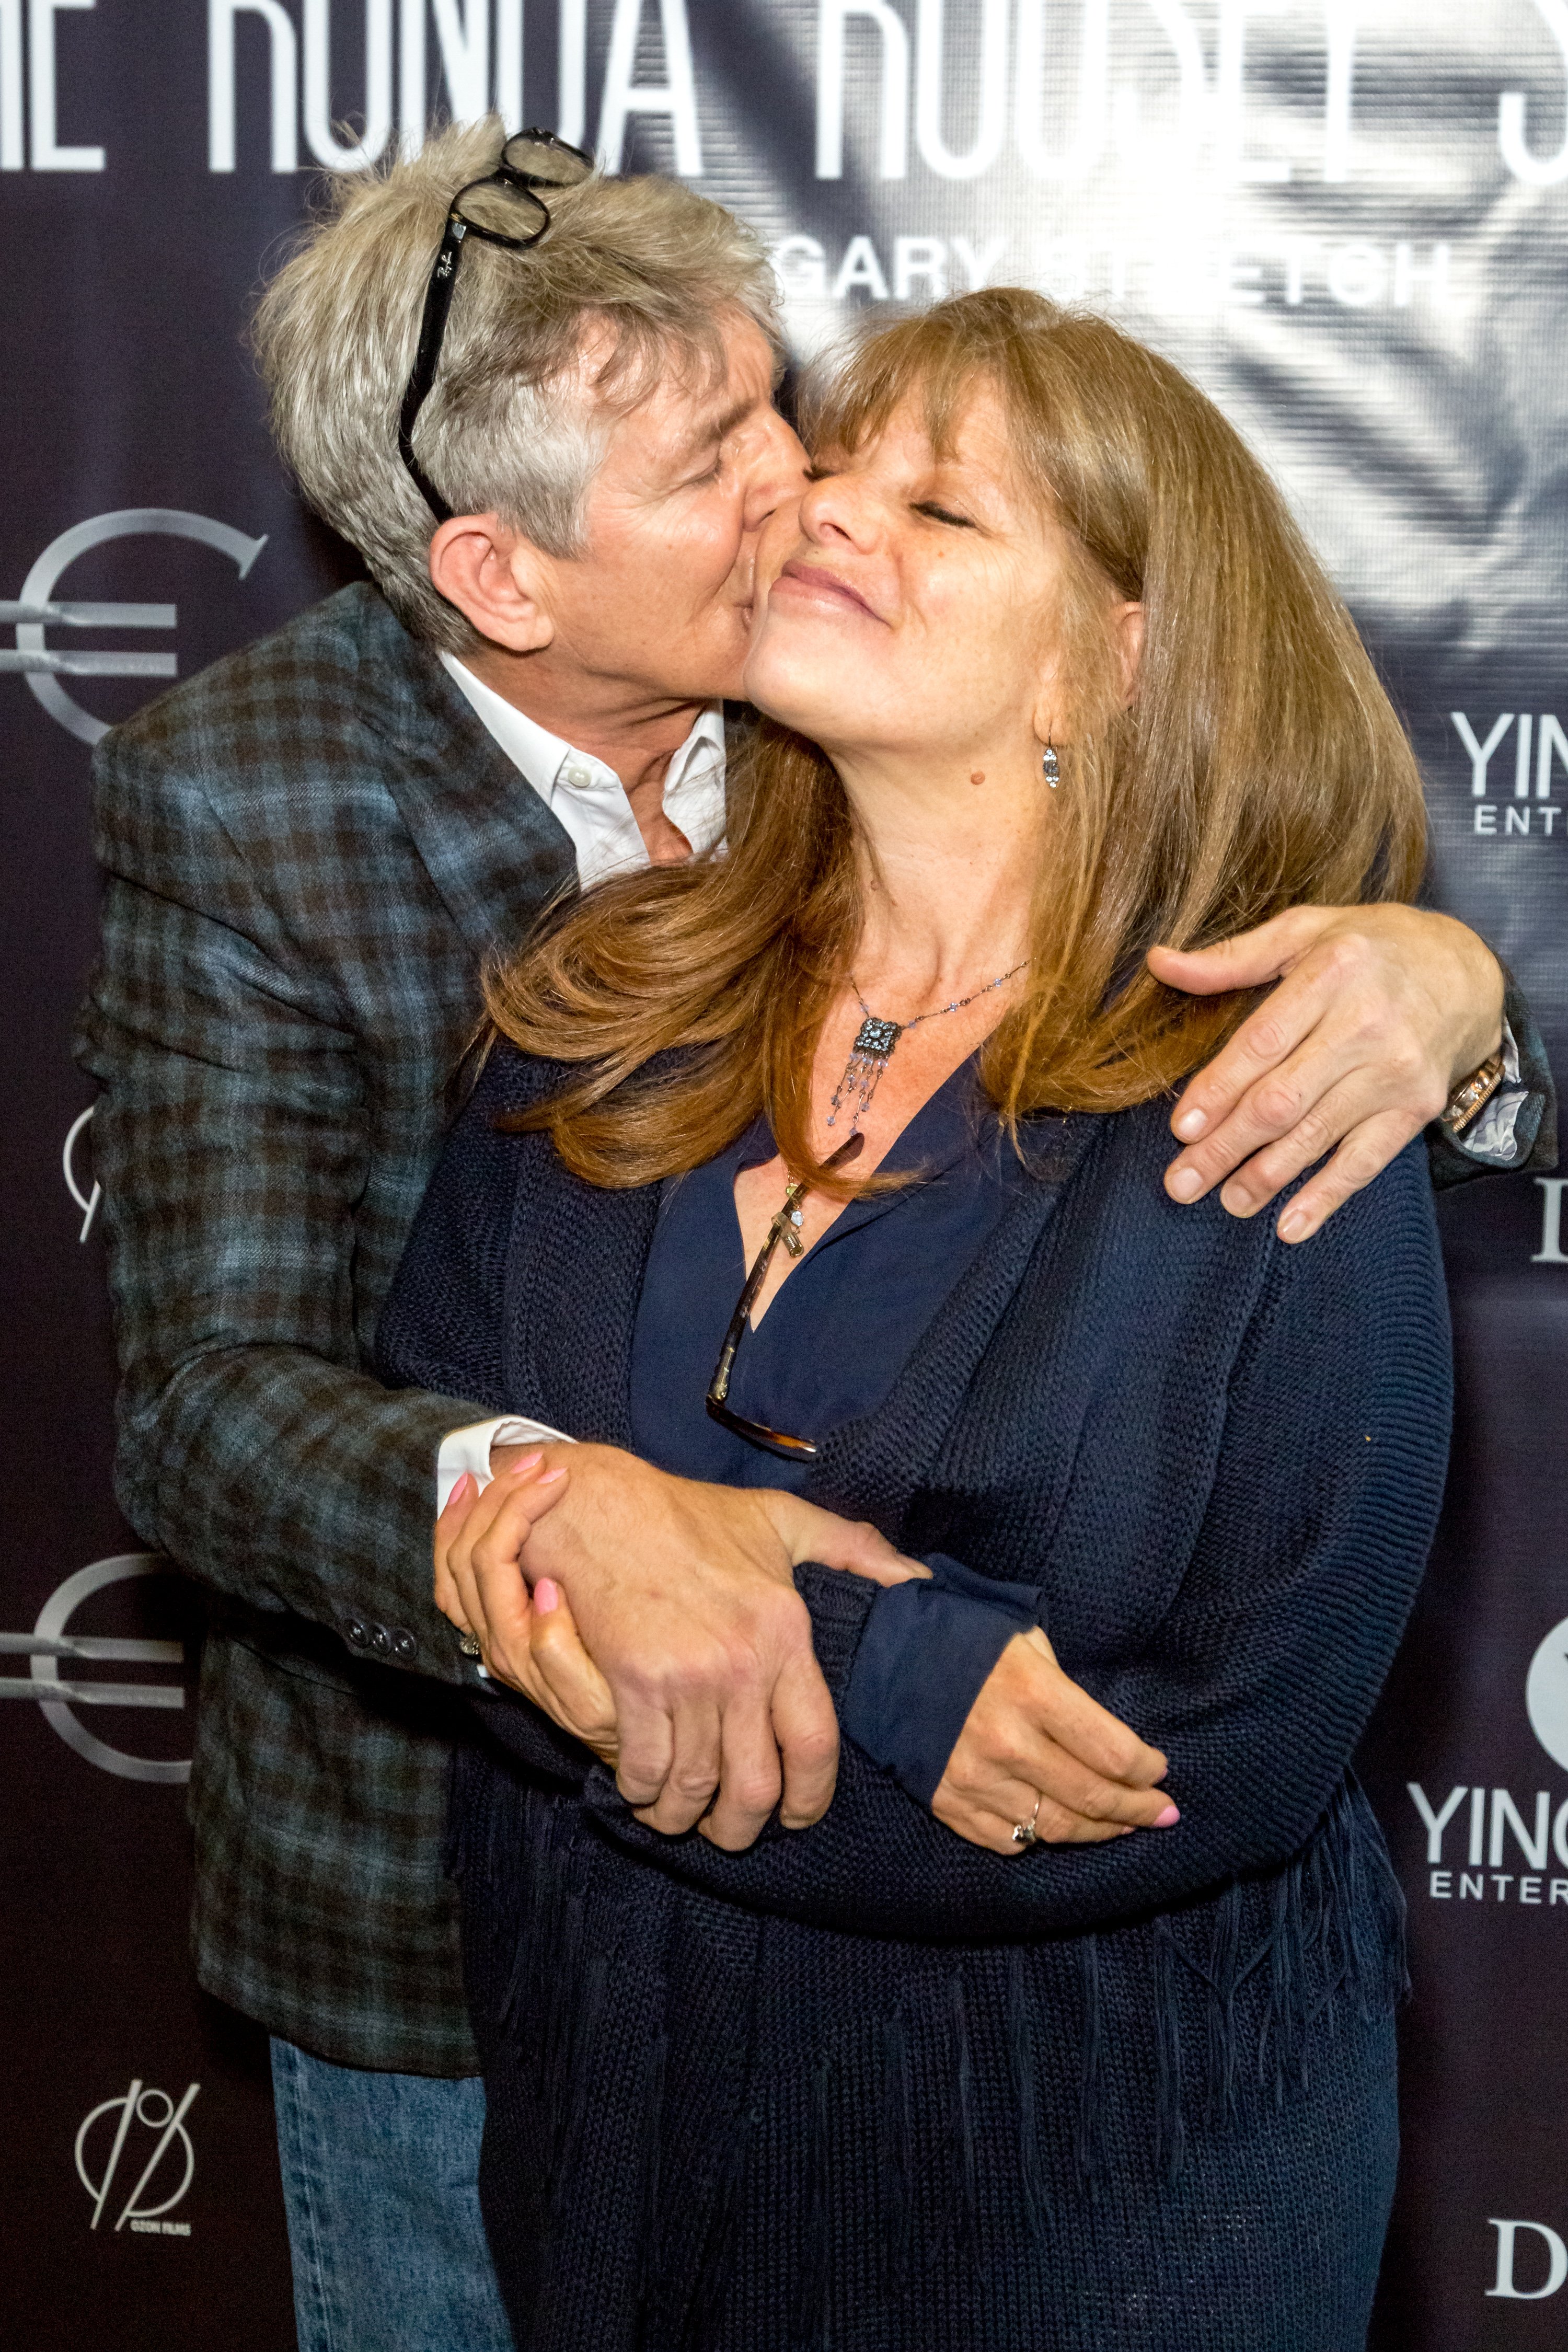 Actor Eric Roberts and his wife Eliza Roberts at the Screening Of "Through My Father's Eyes: The Ronda Rousey Story" at the TCL Chinese Theatre 6 on December 30, 2016 in Hollywood, California. | Source: Getty Images